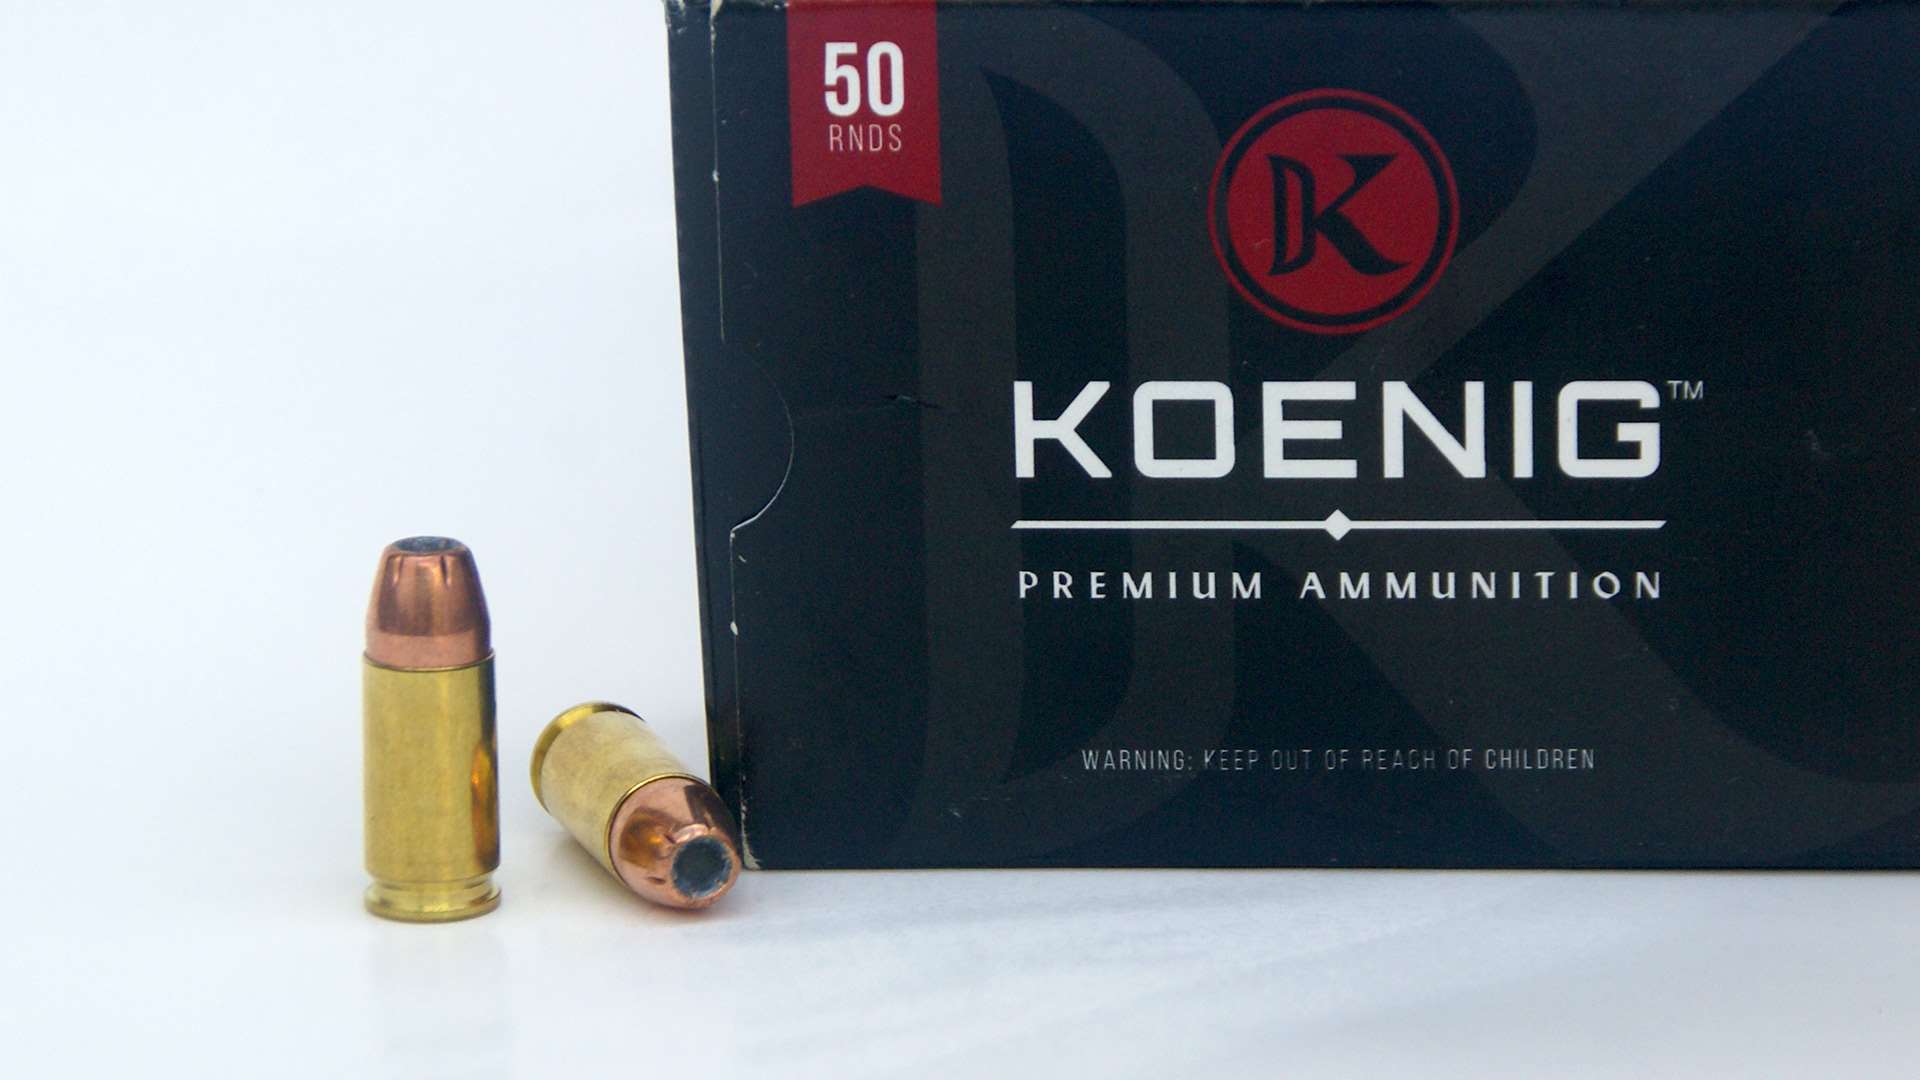 Koenig 9mm competition ammo box and rounds